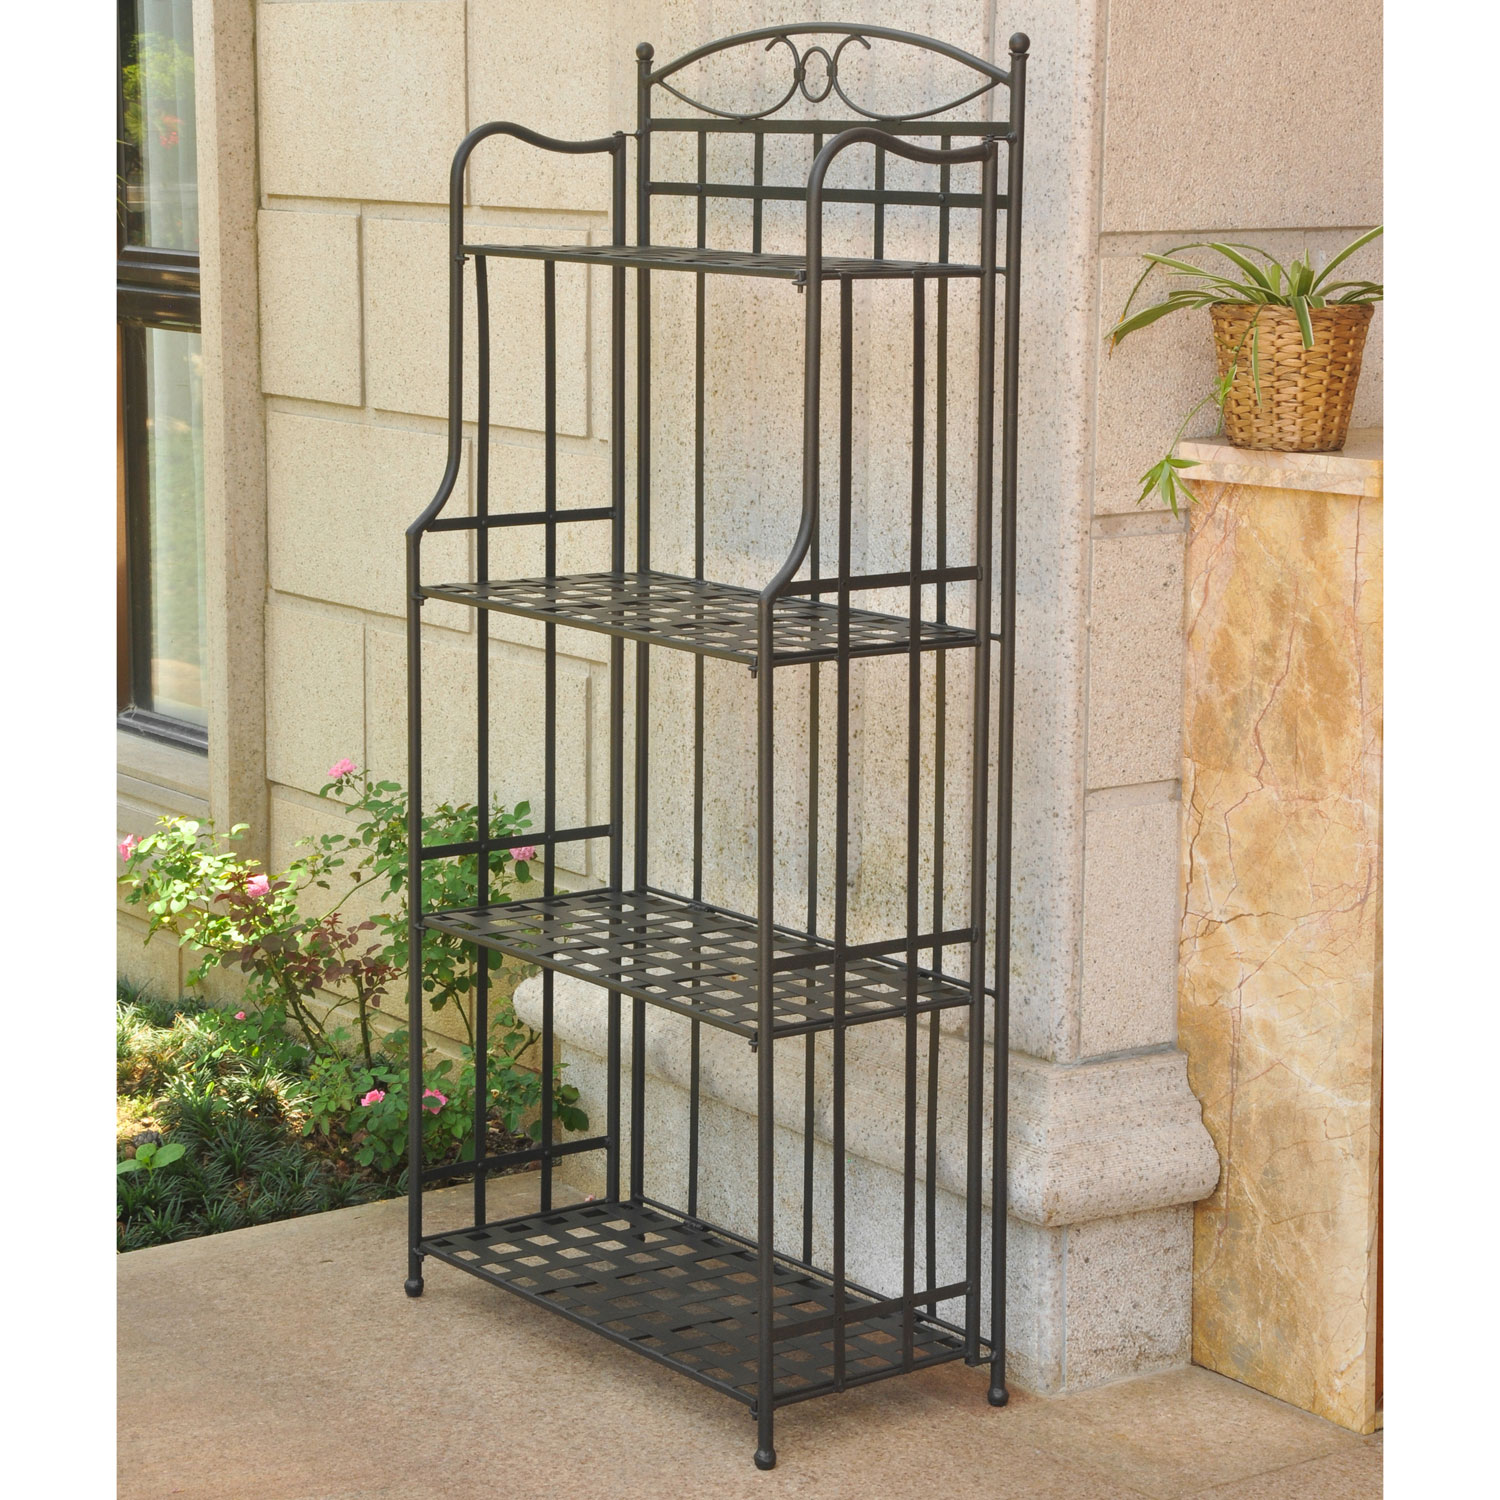 Patio Accessories Category